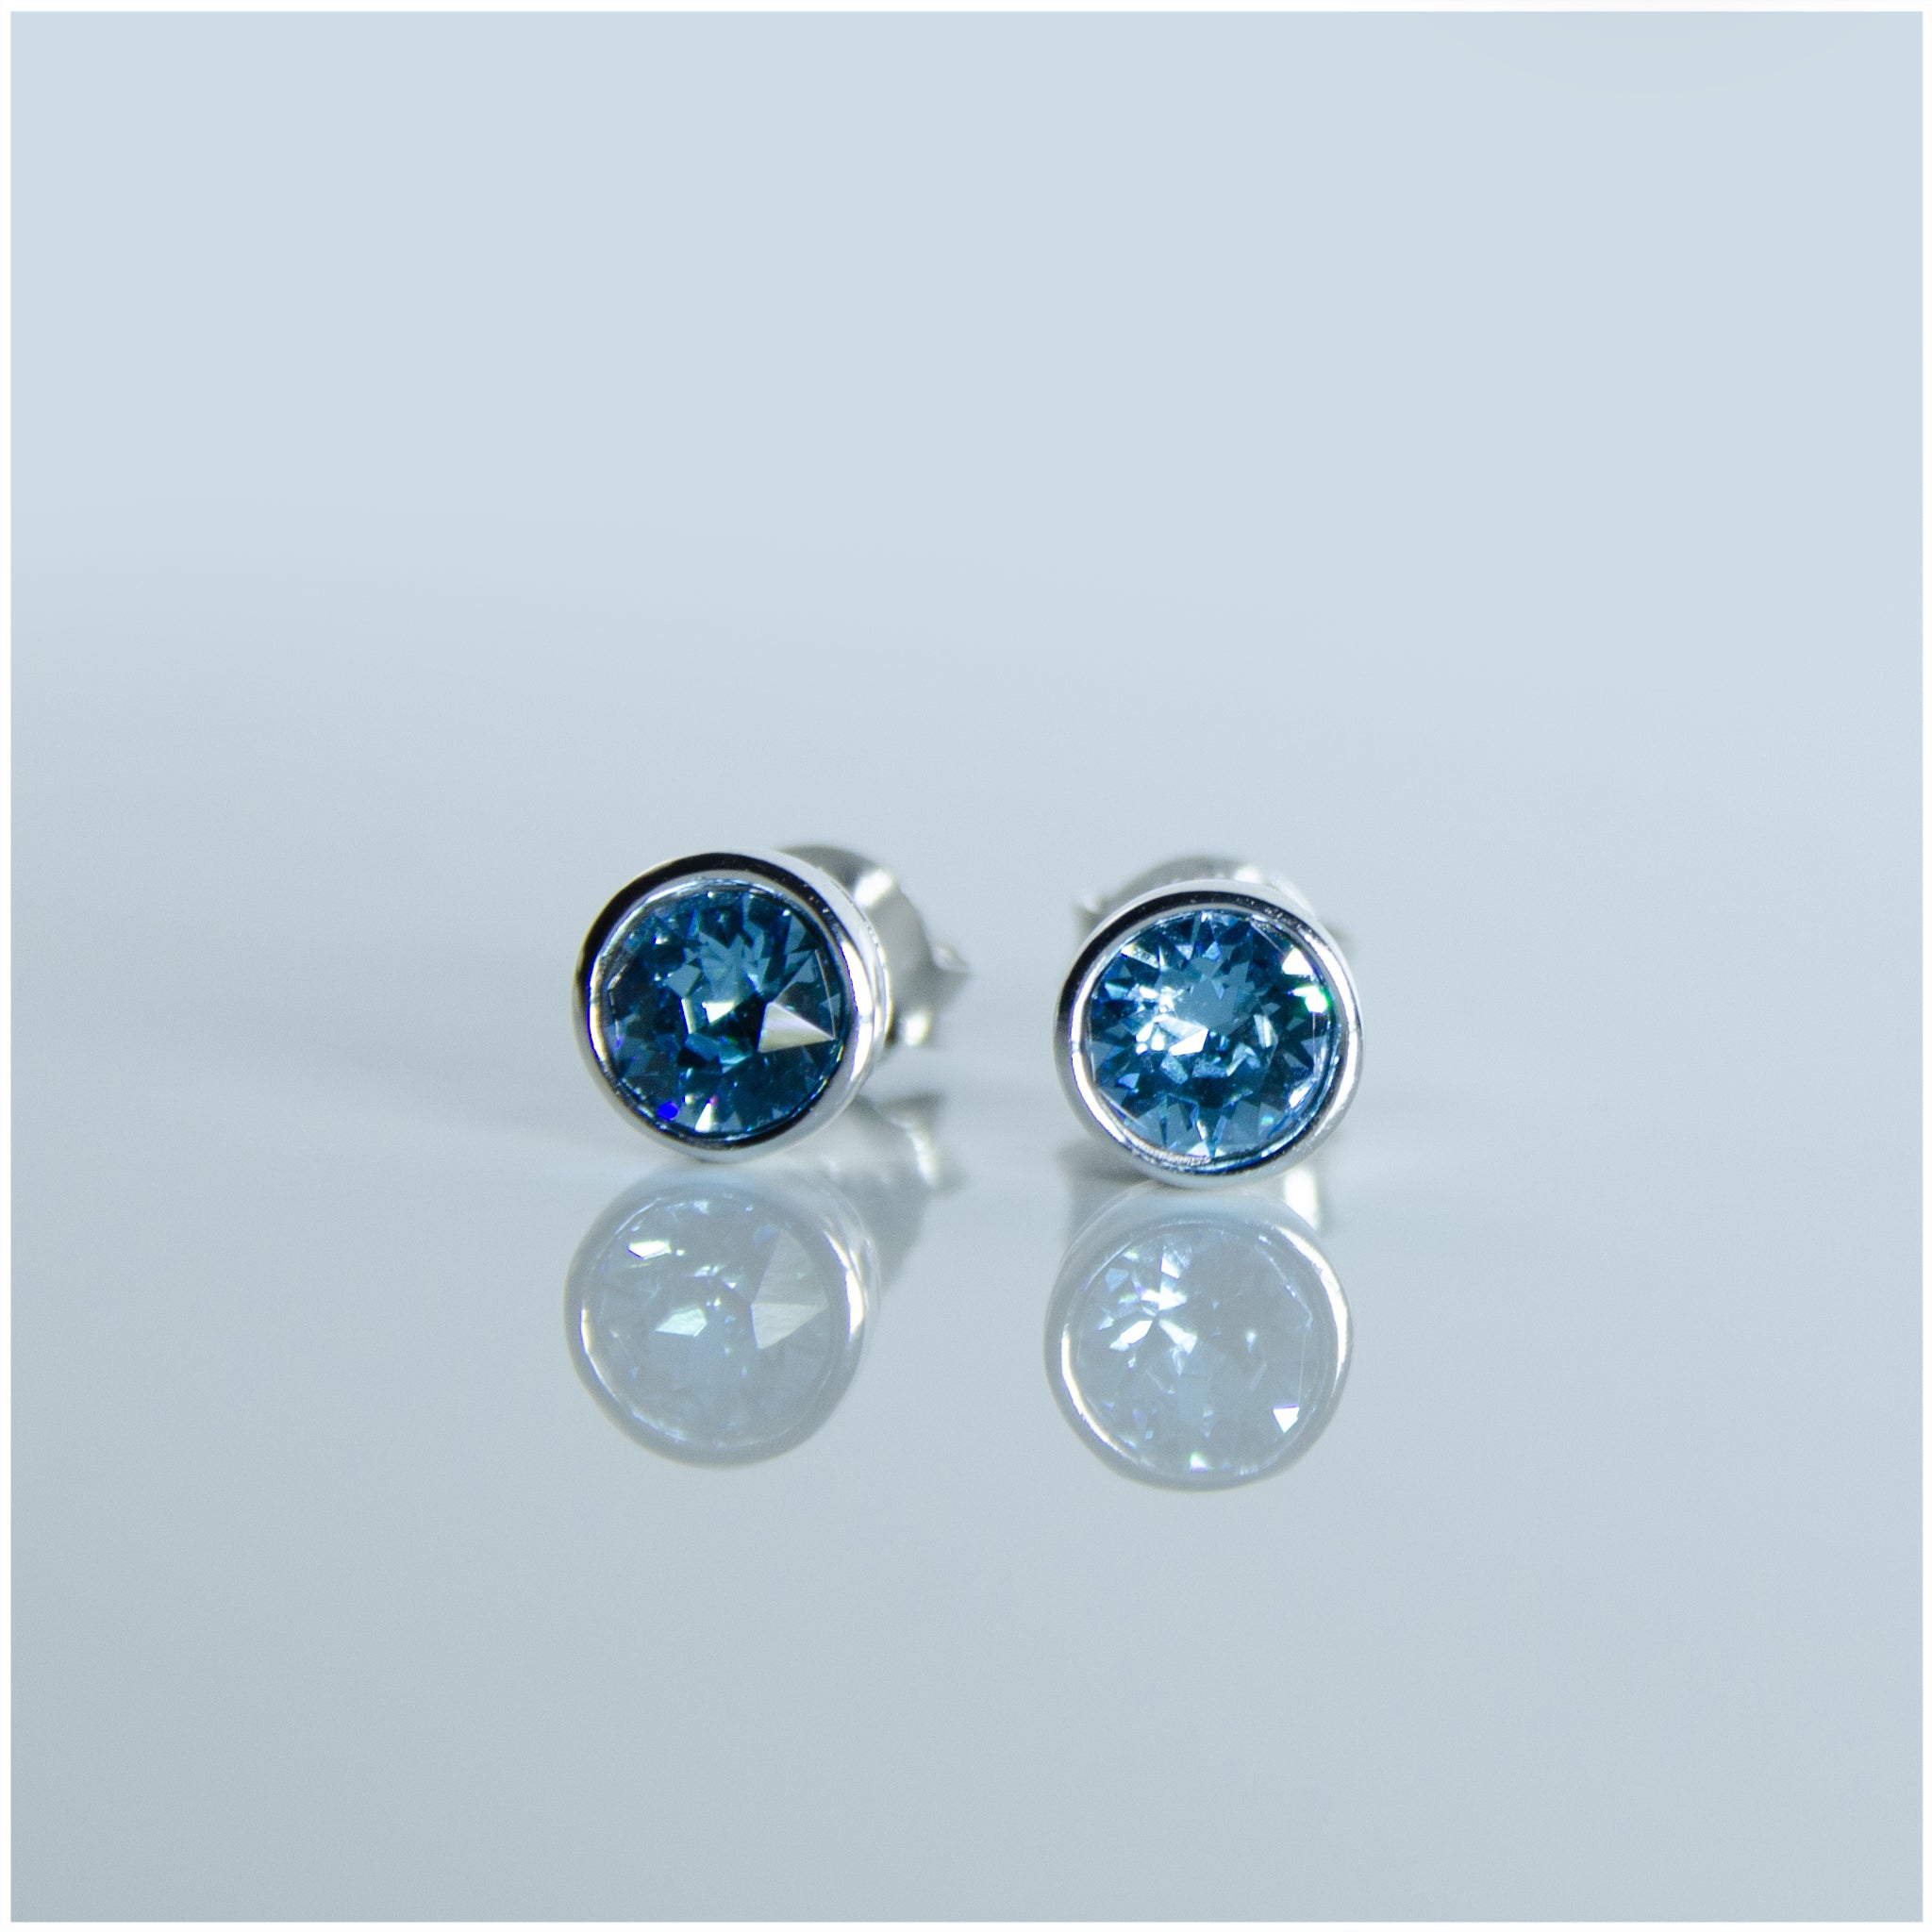 ES078 - Sterling Silver Push-Back Stud Earrings Decorated with Authentic Swarovsk Crystals